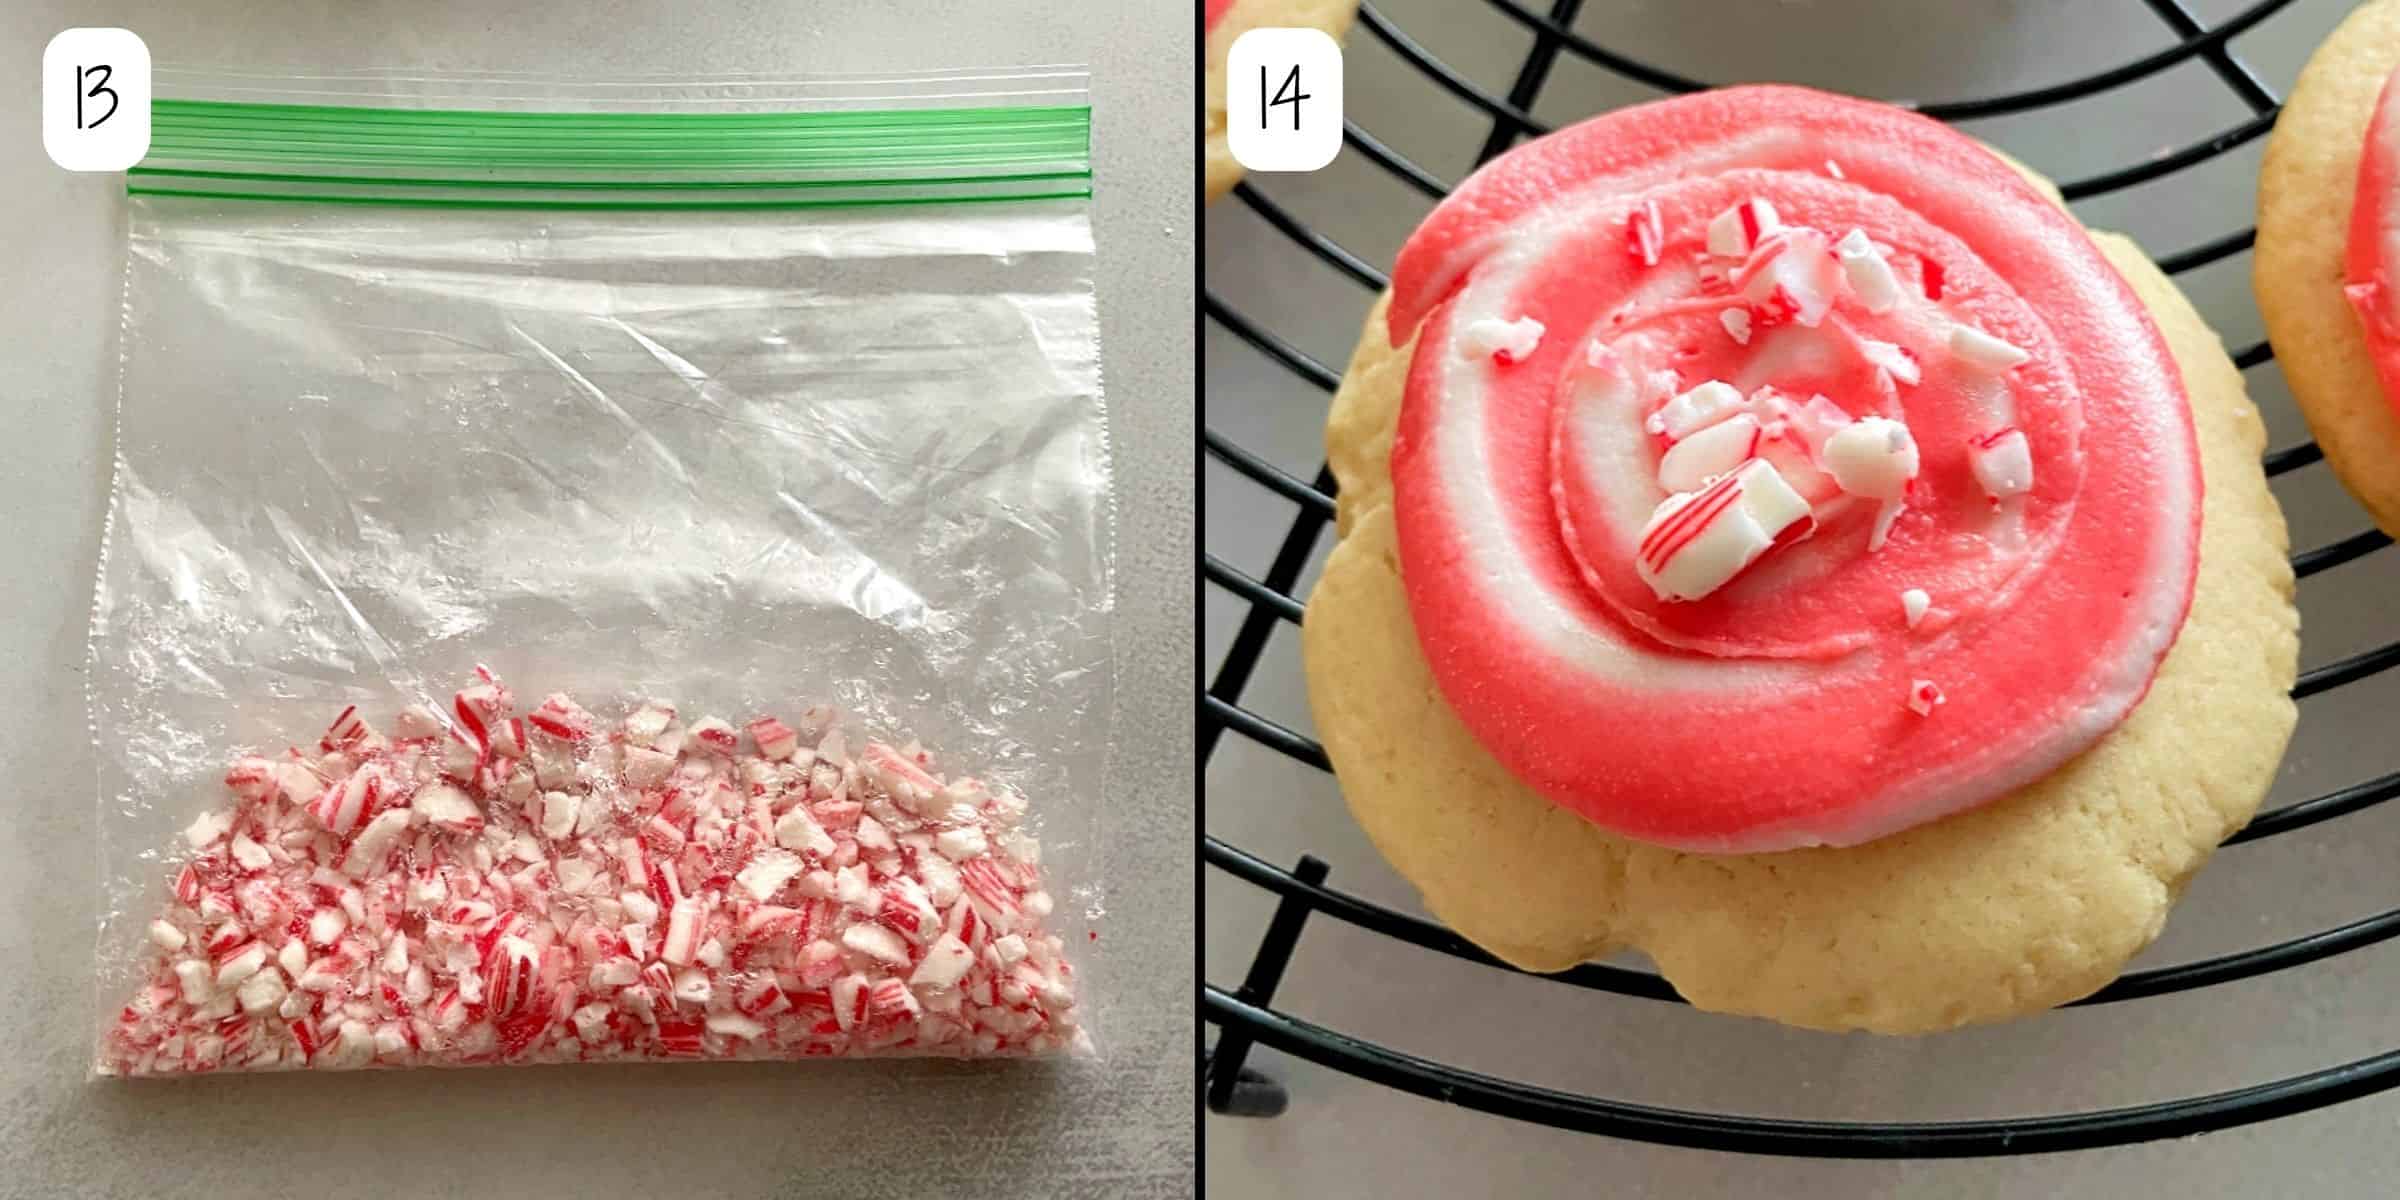 crushed candy canes and candy cane cookie.